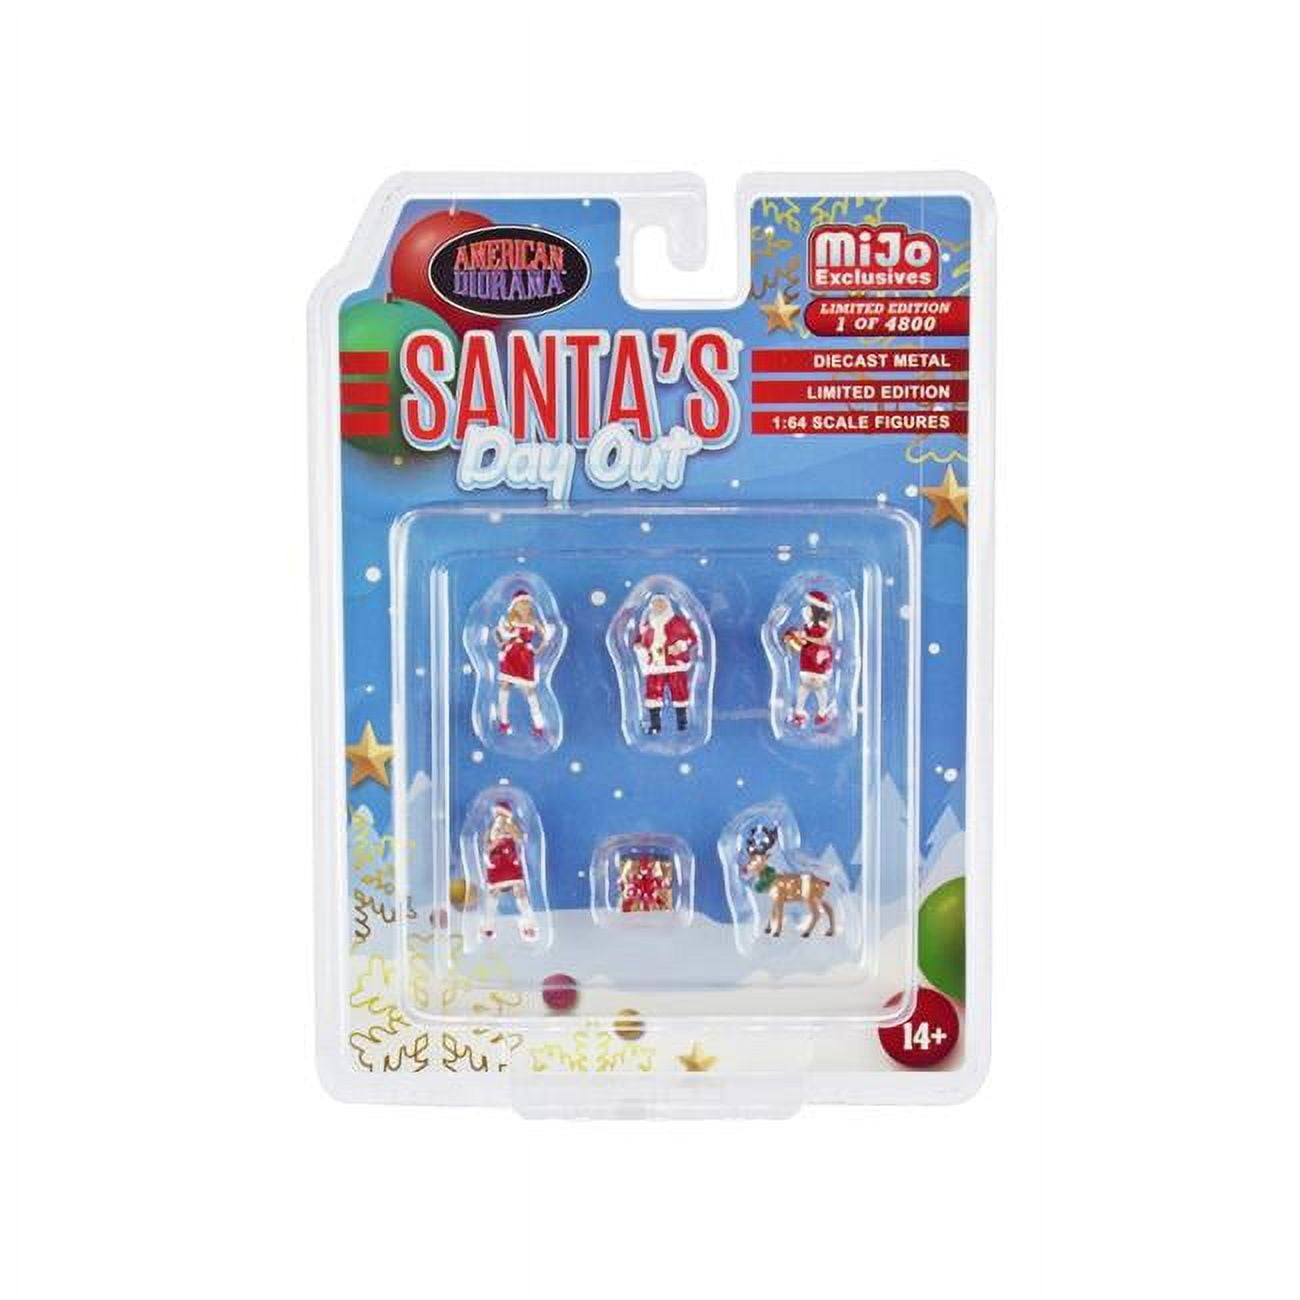 Picture of American Diorama AD-76508MJ Santas Day Out 6 Piece Diecast Set - 1 Man 2 Women 1 Reindeer 1 Present Figures & Accessories Limited Edition Worldwide 1-64 Scale Models - 4800 Piece